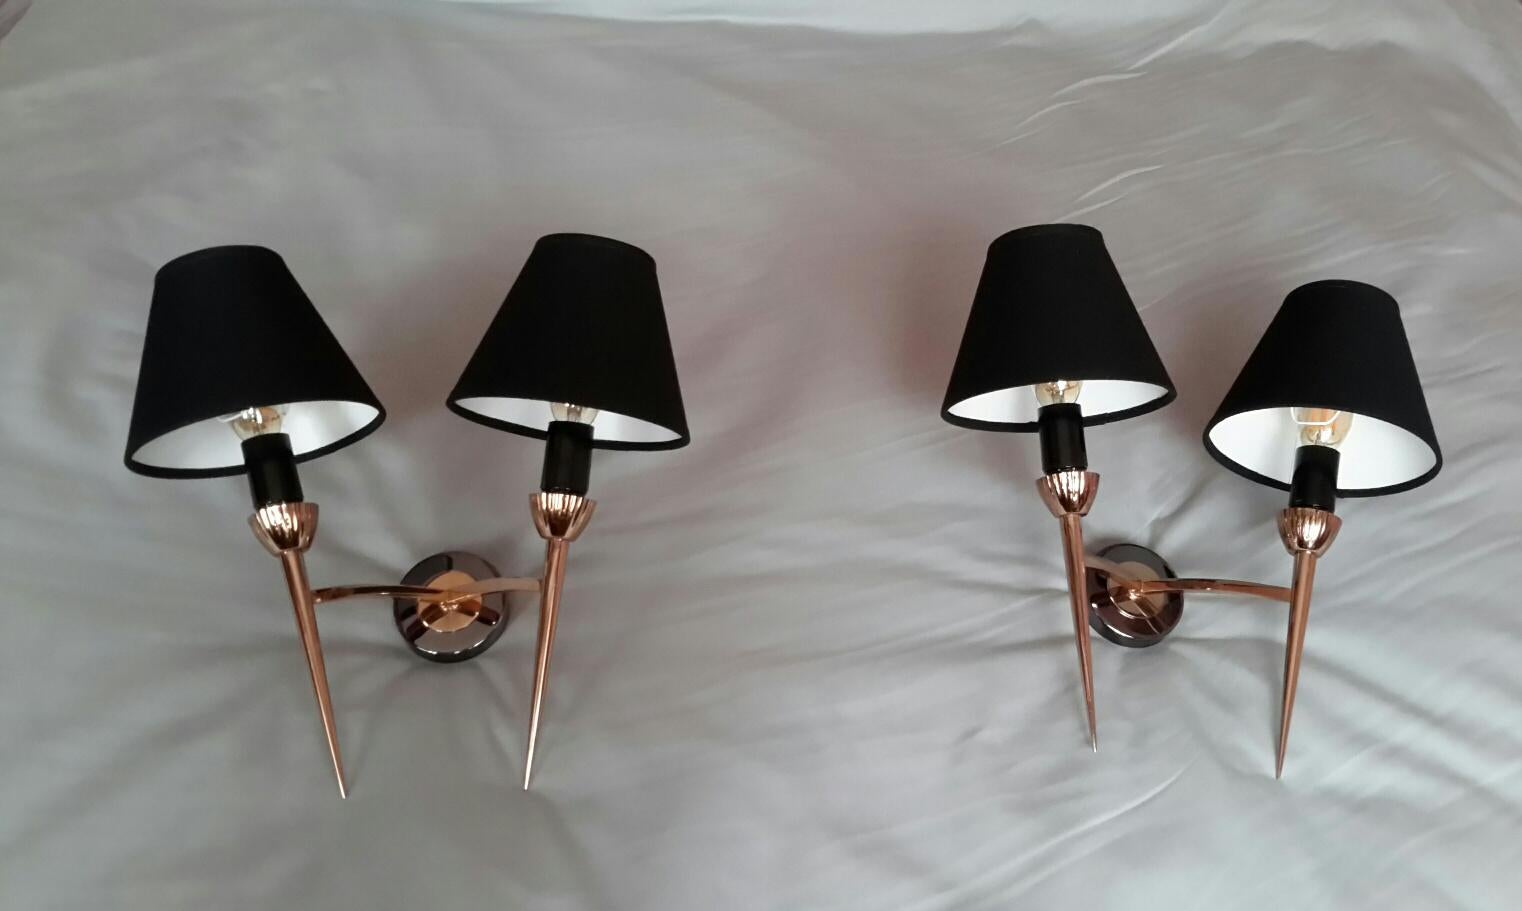 Beautiful pair of neoclassical 2 arms sconces in brass and metal gun patina from the 1950s by french Maison Lunel.
The pair is in an excellent condition. 
The electric part has been renewed (max 40 watts each bulb) and fit the US Standards. The